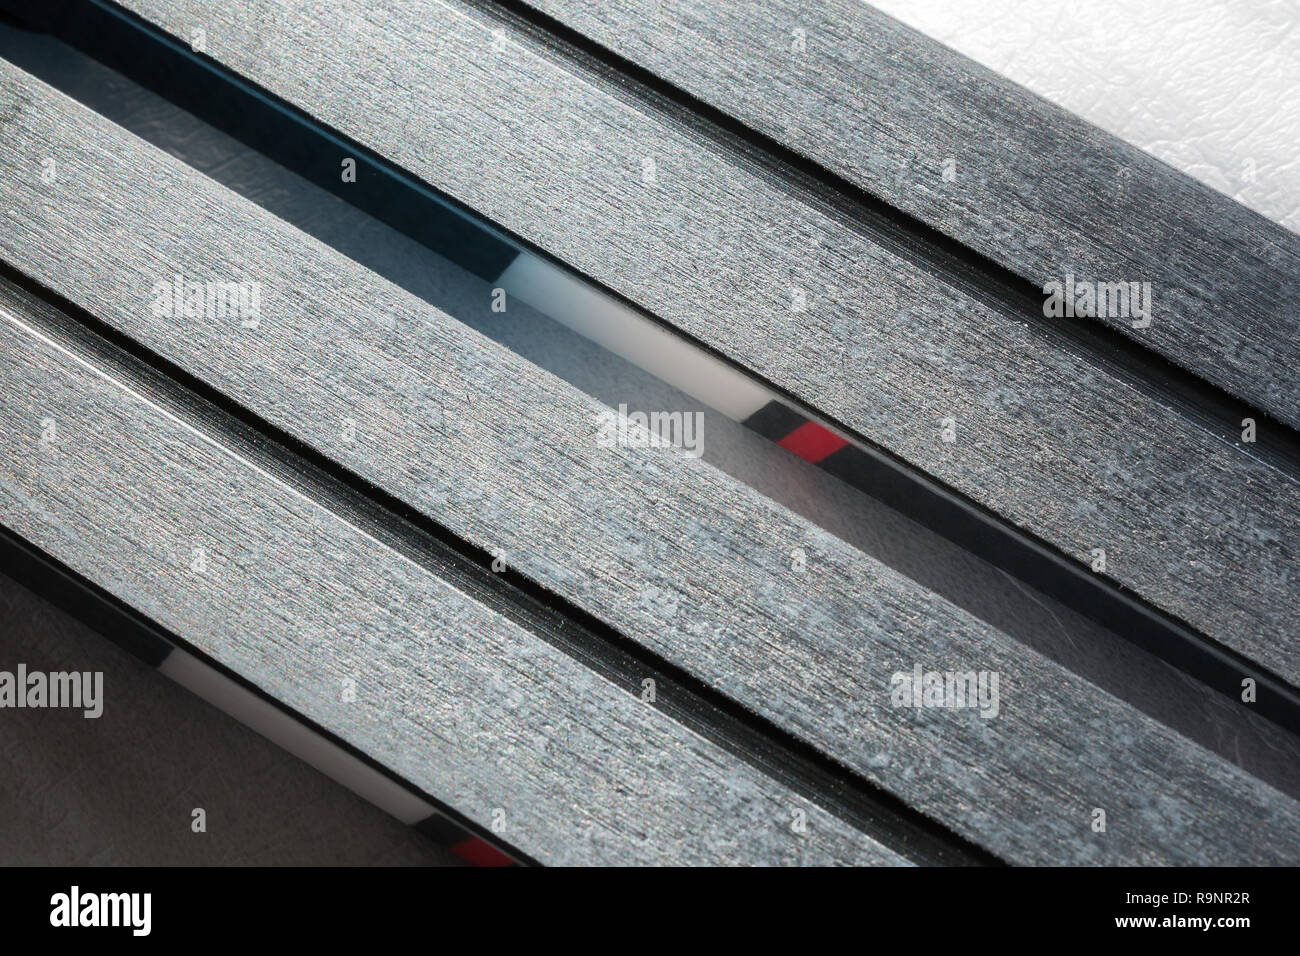 Modern cross-country skis with nanotechnology grip coating on bases. Stock Photo